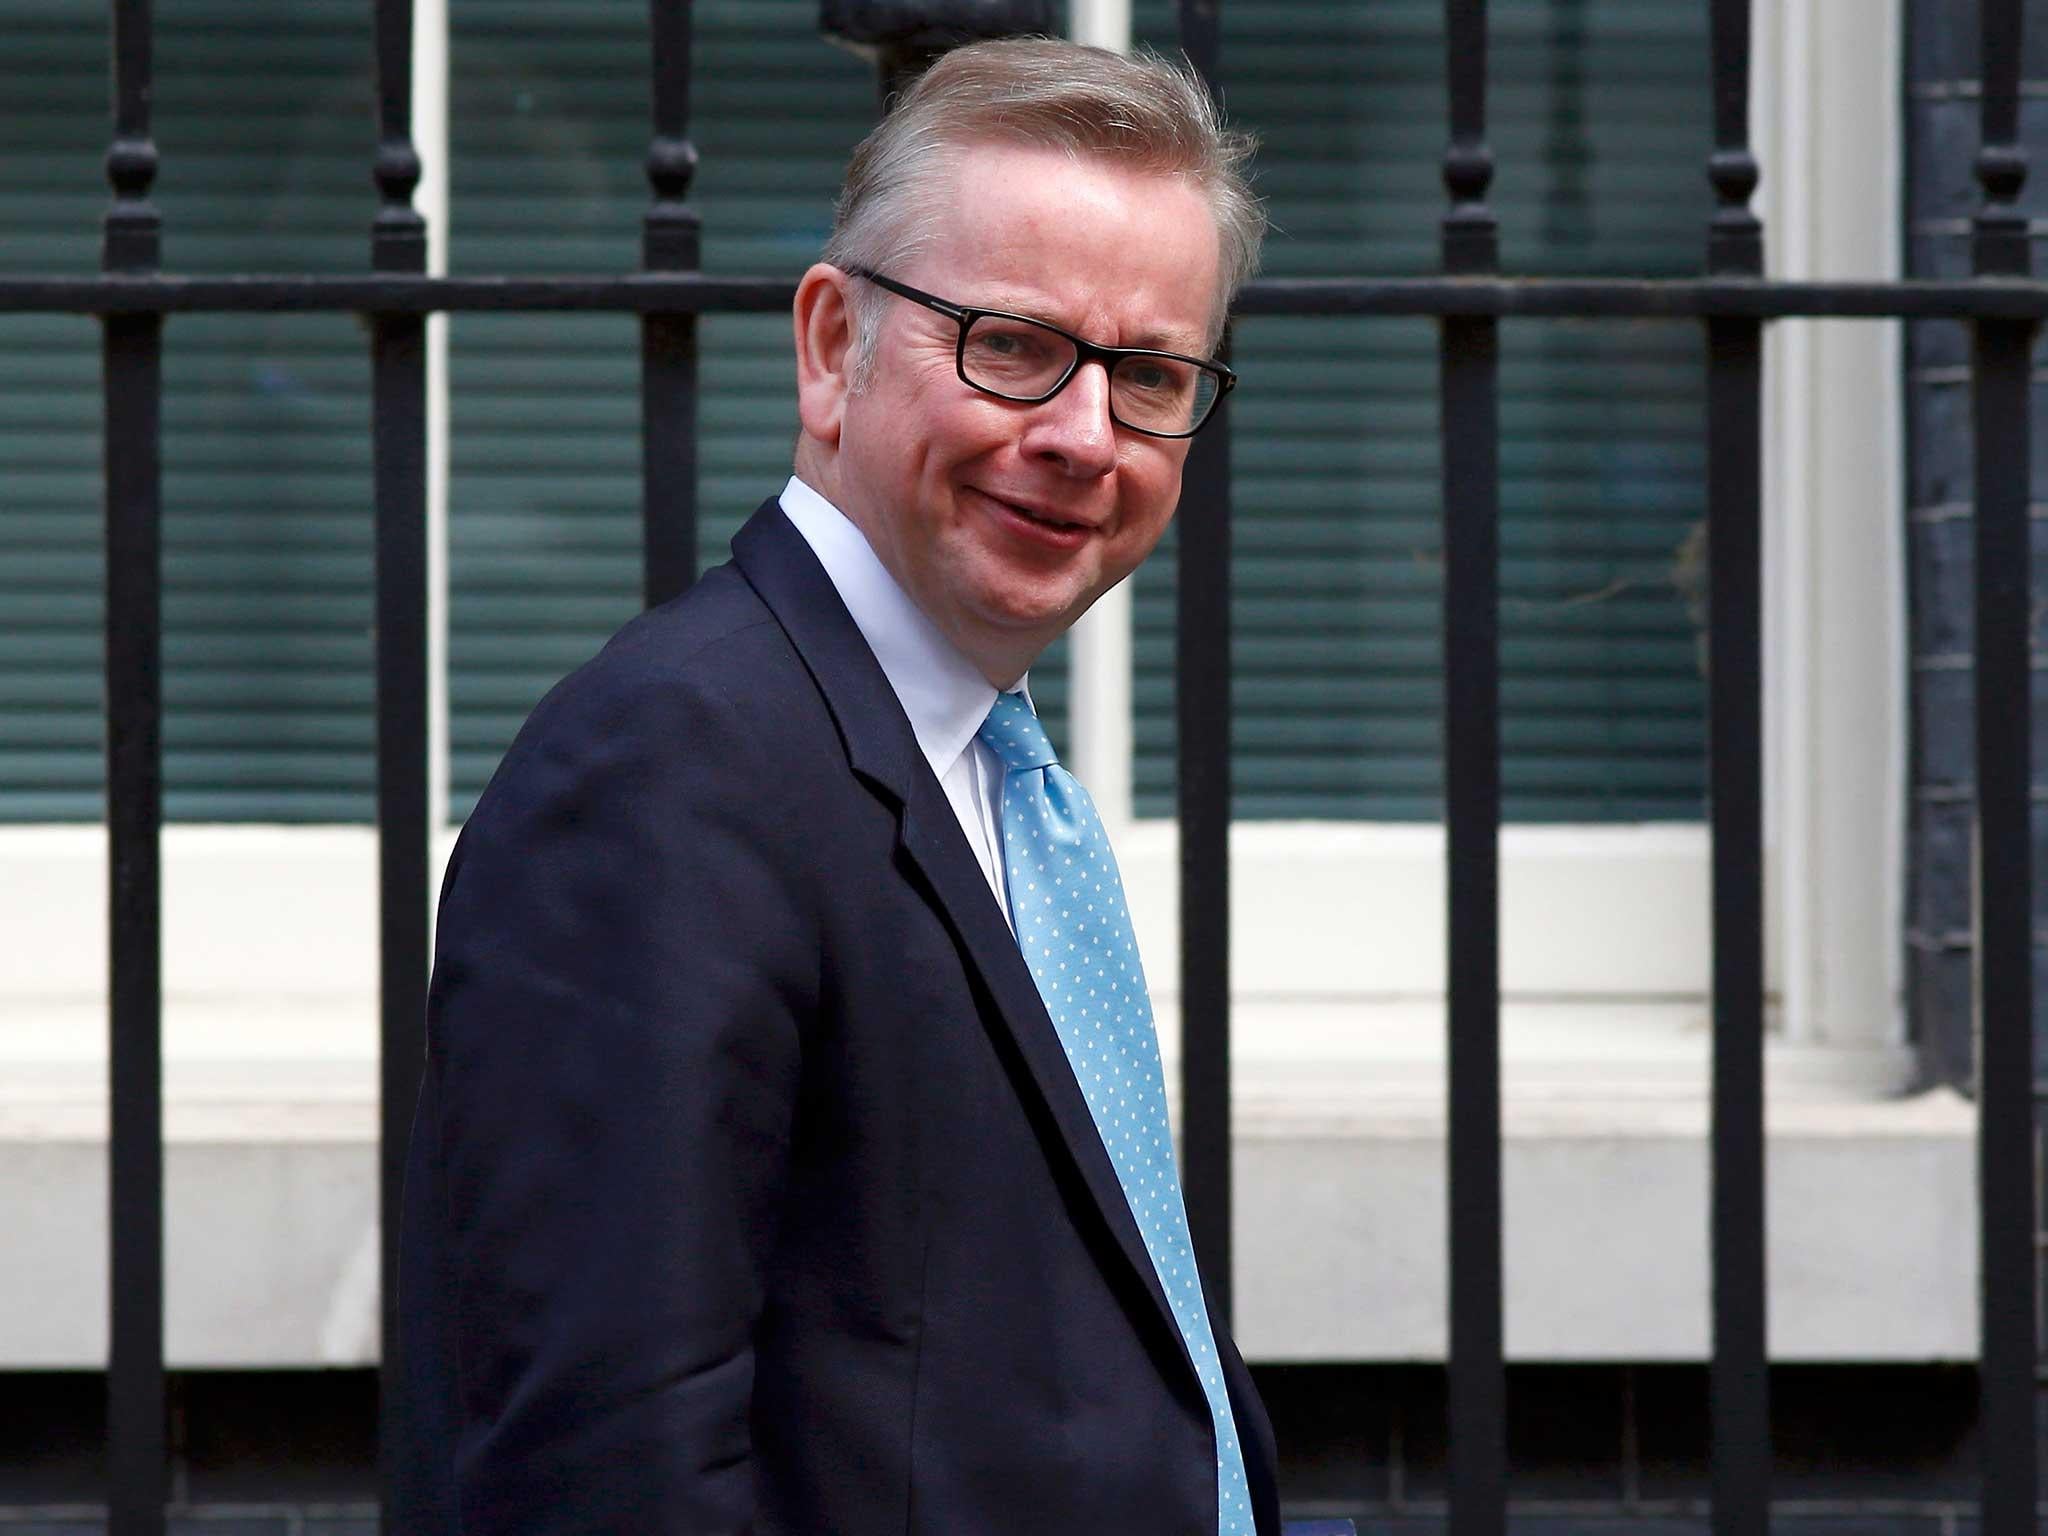 Michael Gove sacked as Justice Secretary by Theresa May